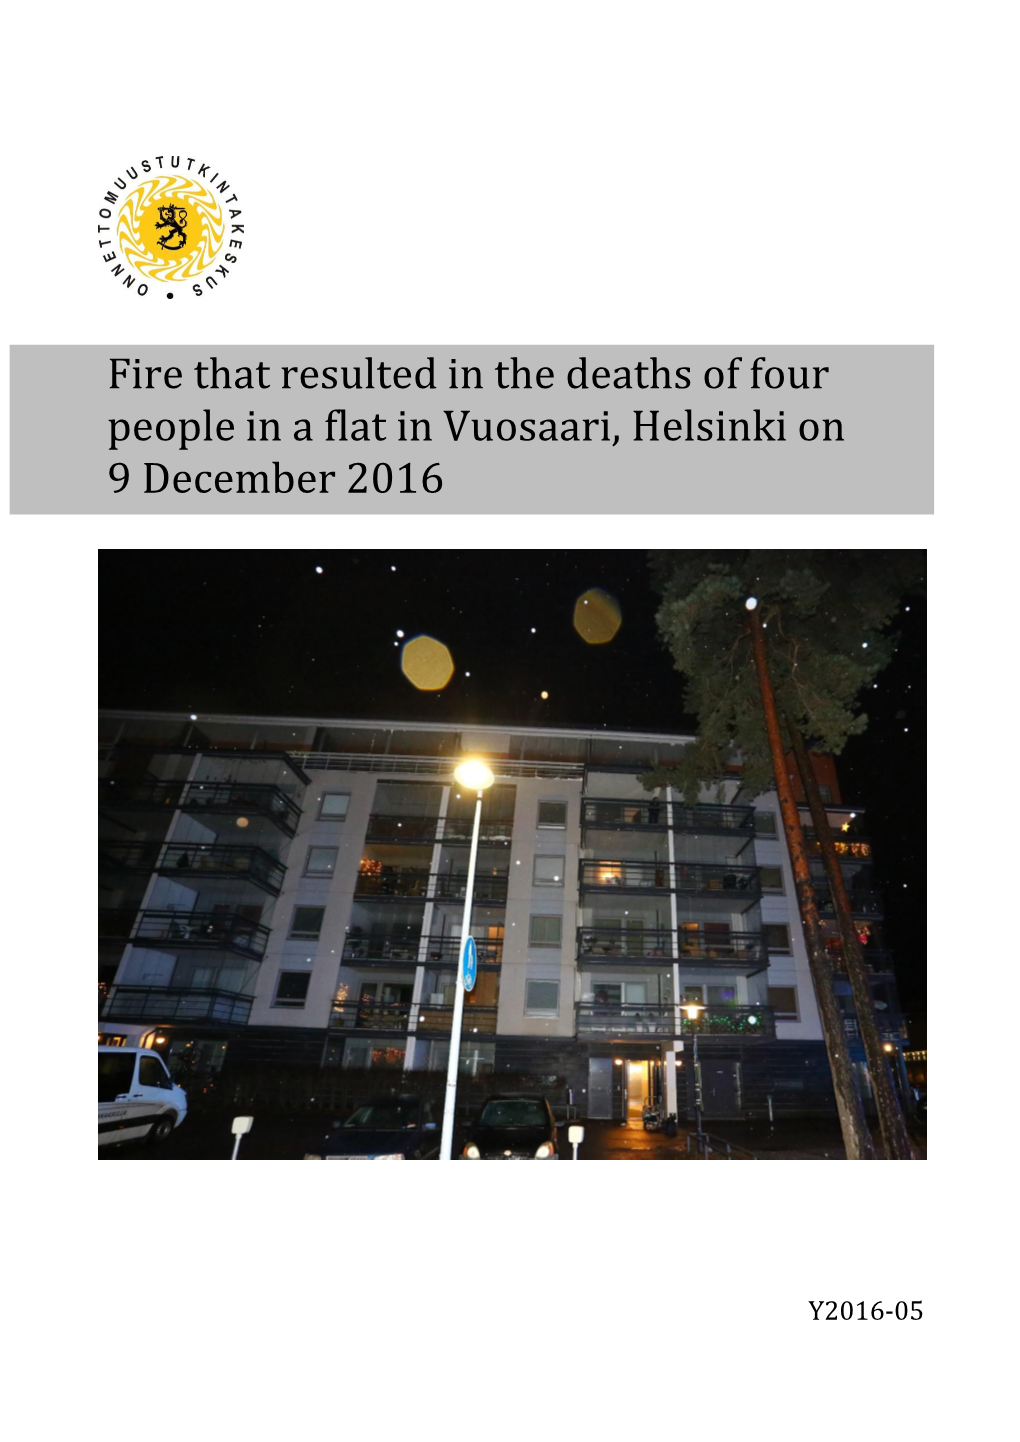 Fire That Resulted in the Deaths of Four People in a Flat in Vuosaari, Helsinki on 9 December 2016